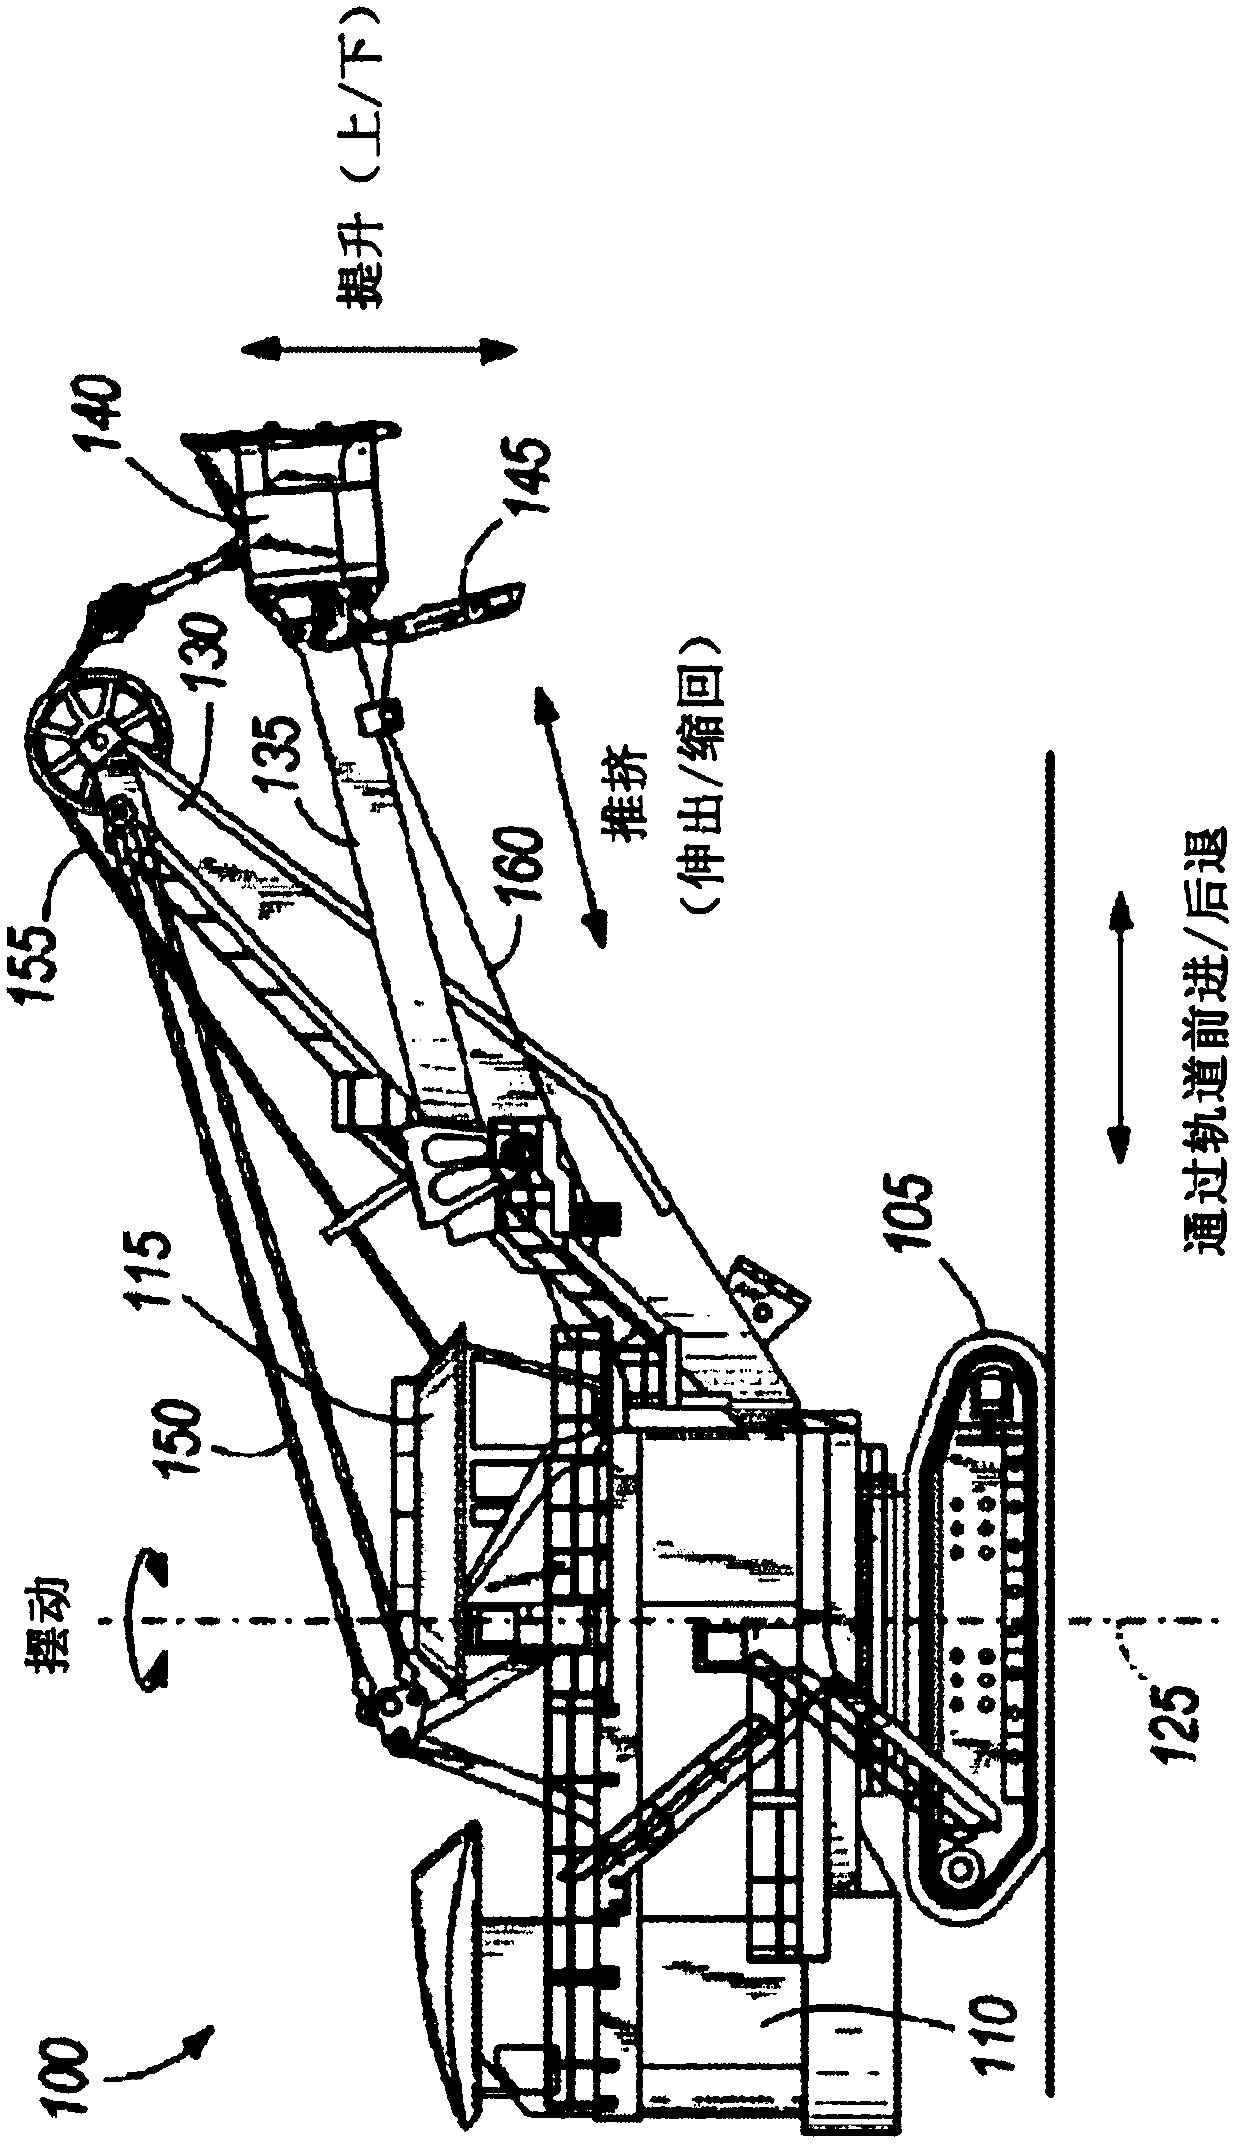 Systems and methods for remote monitoring of drilling equipment